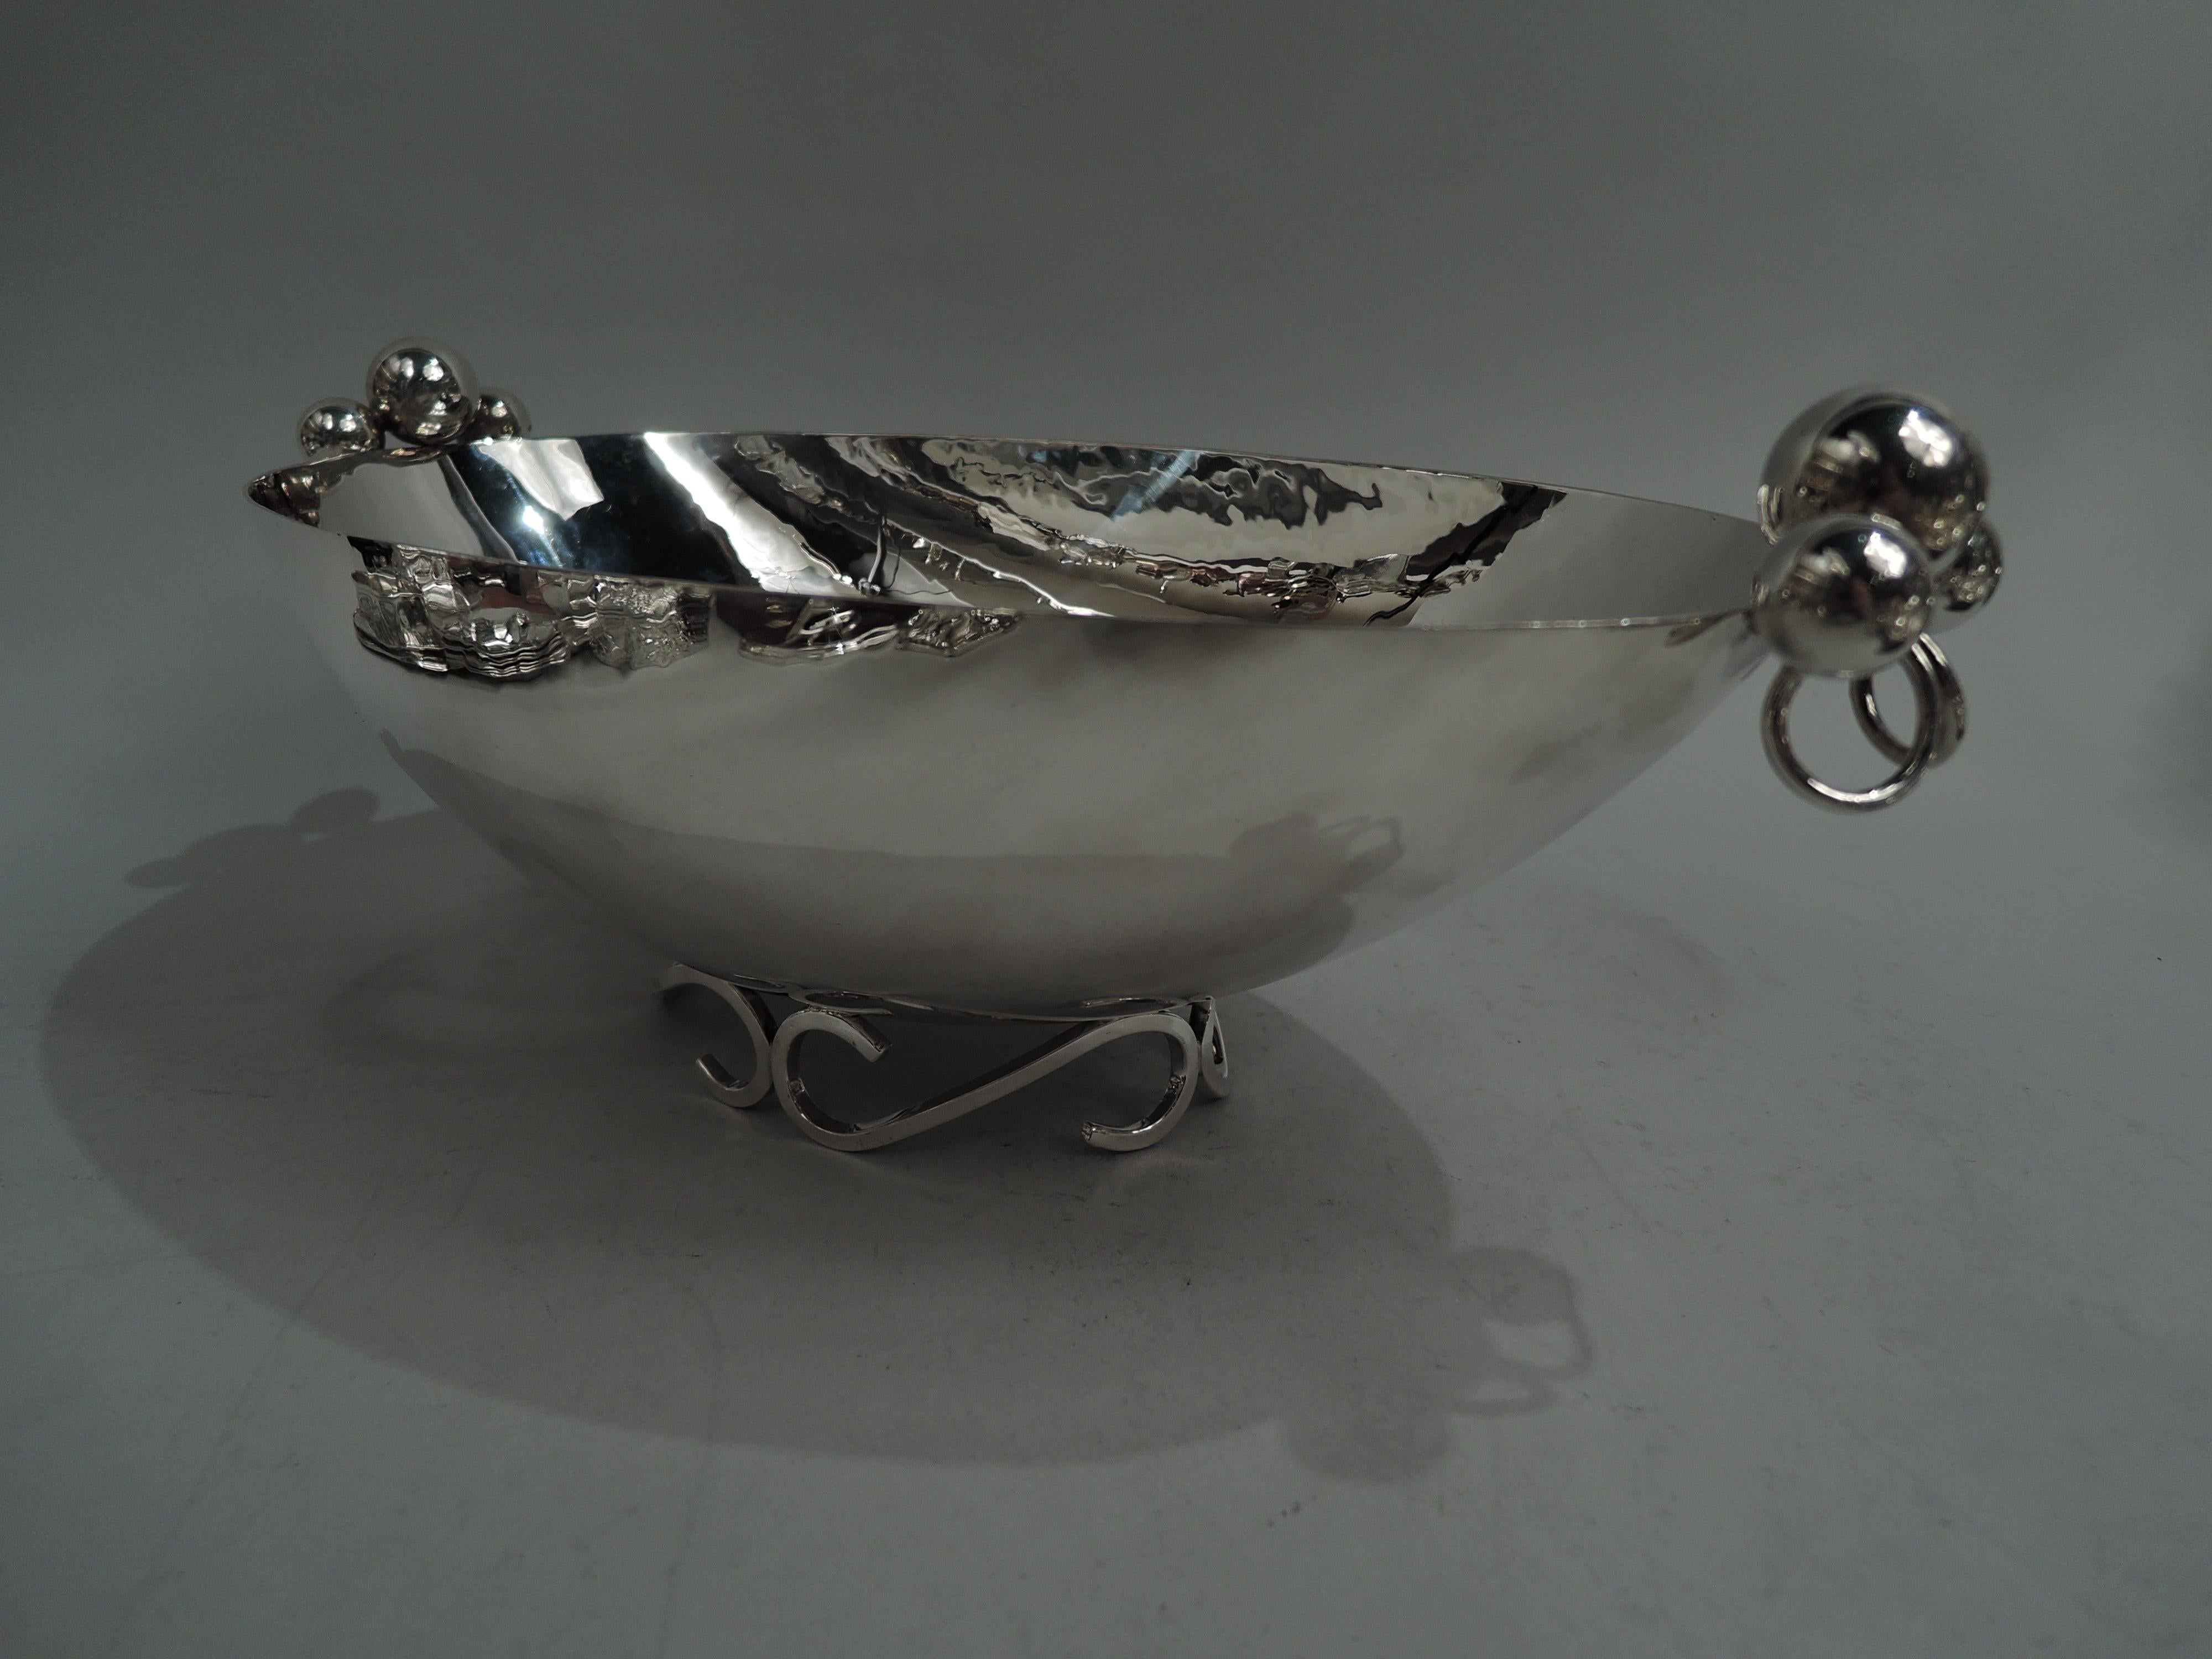 Midcentury Modern sterling silver centerpiece bowl. Made by Alfredo Sciarrotta in Newport. Curved oval on open s-scroll support. Bead and ring ornament mounted to ends. Visible hand hammering. Marked “Sciarrotta / Hand Made / Sterling / 117”.